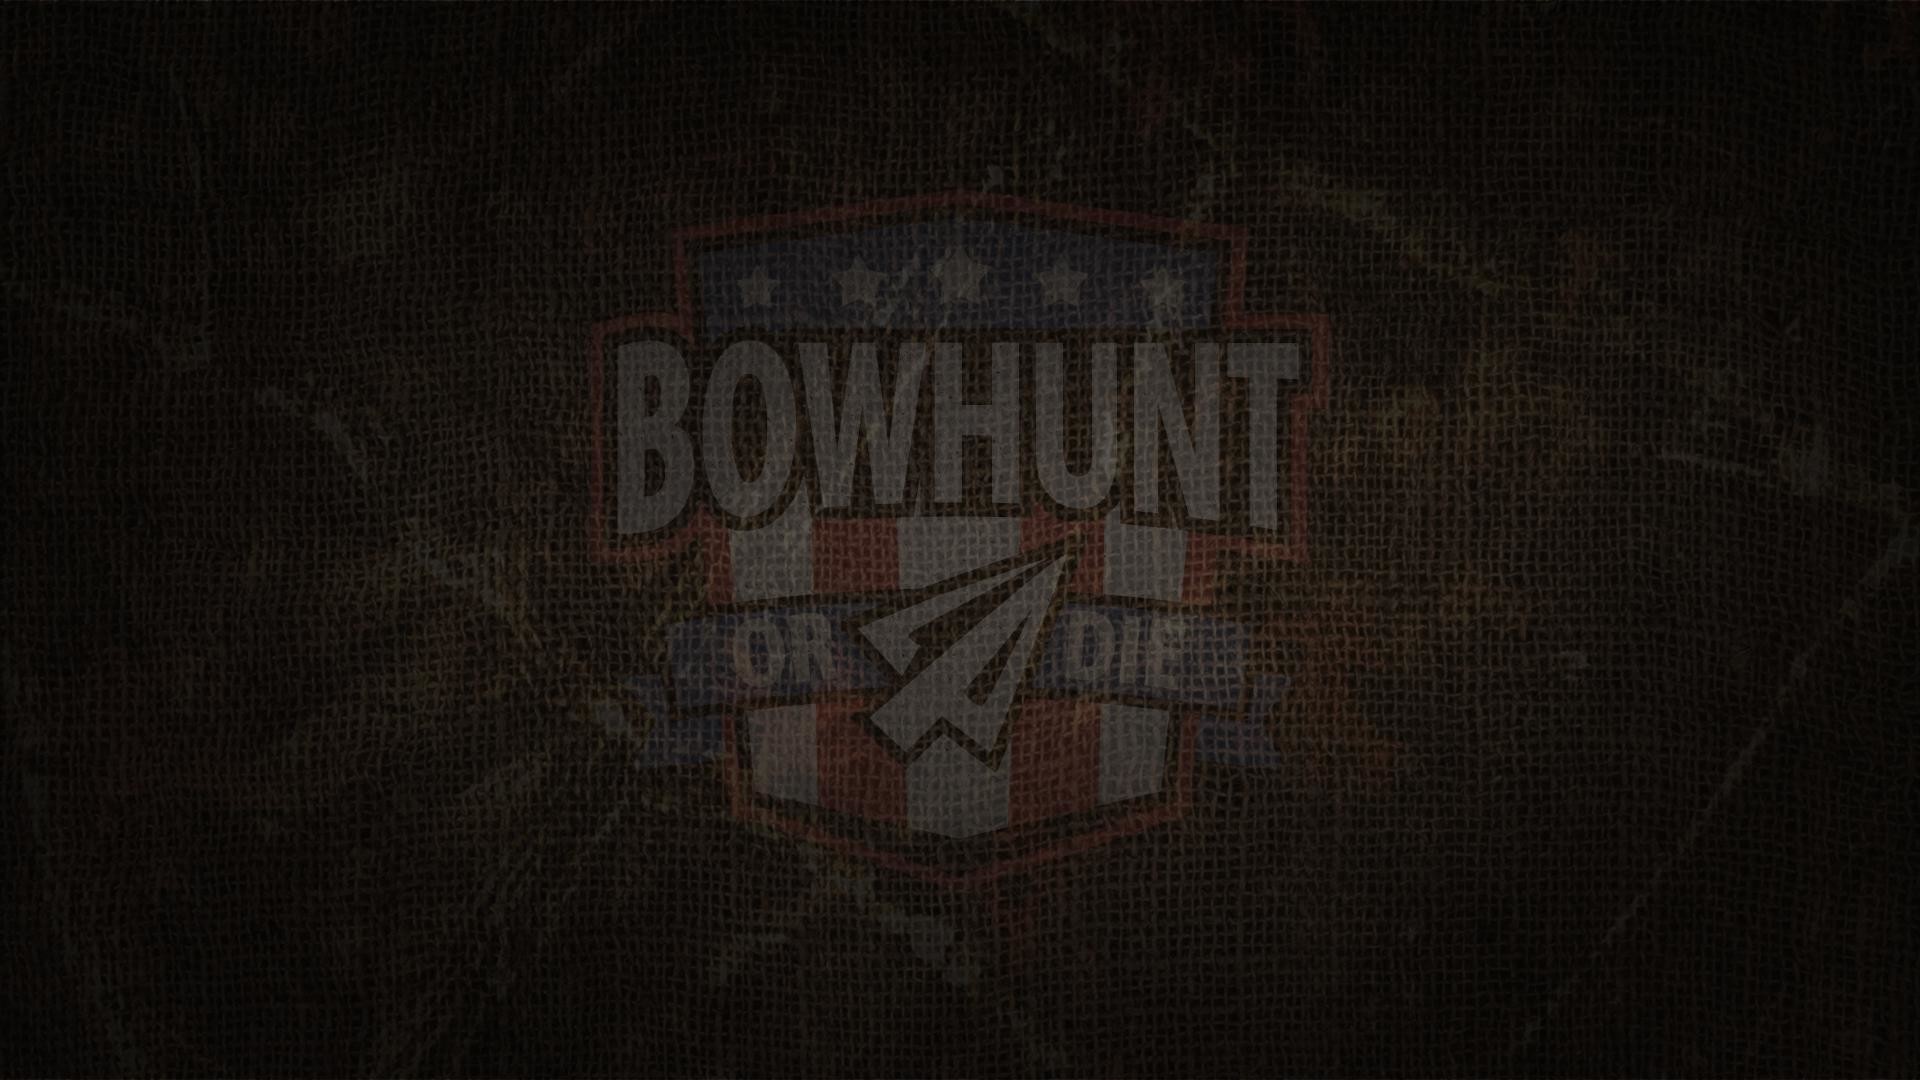 1920x1080 Backgrounds Archive | Bowhunting.com